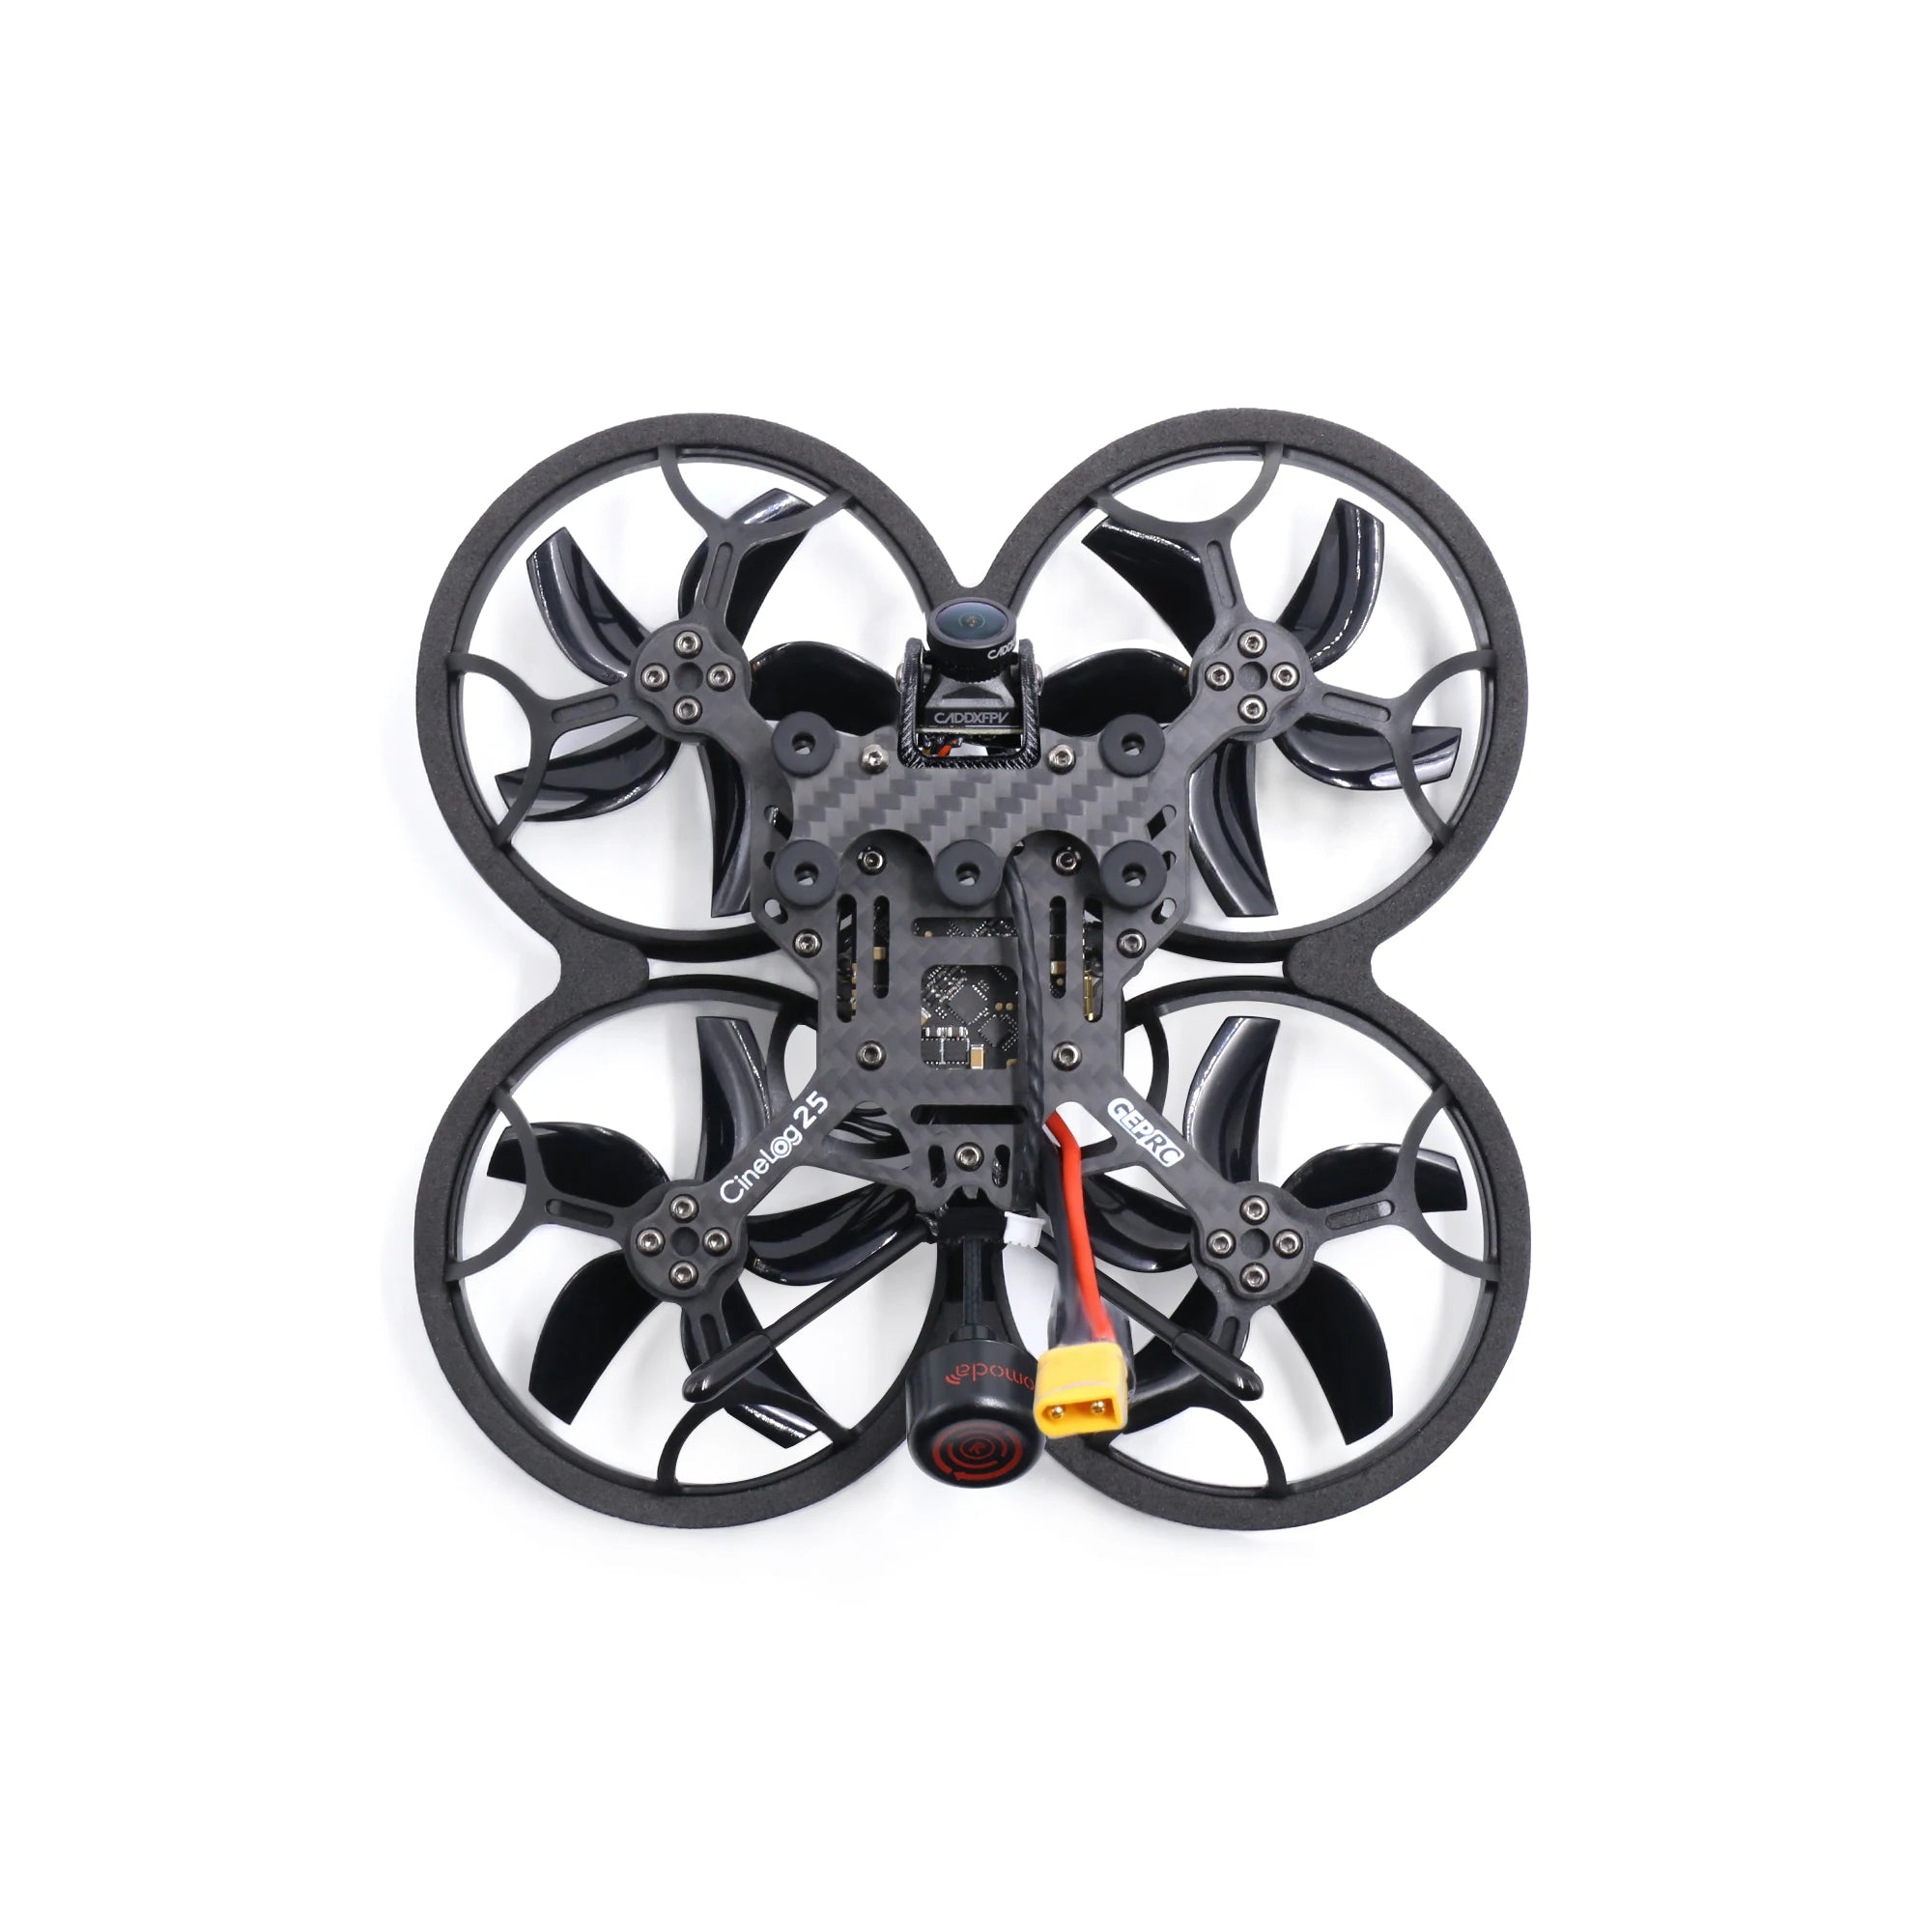 GEPRC CineLog25 Analog CineWhoop Drone, a low center of gravity "pusher-style" inverted frame, increased efficiency at